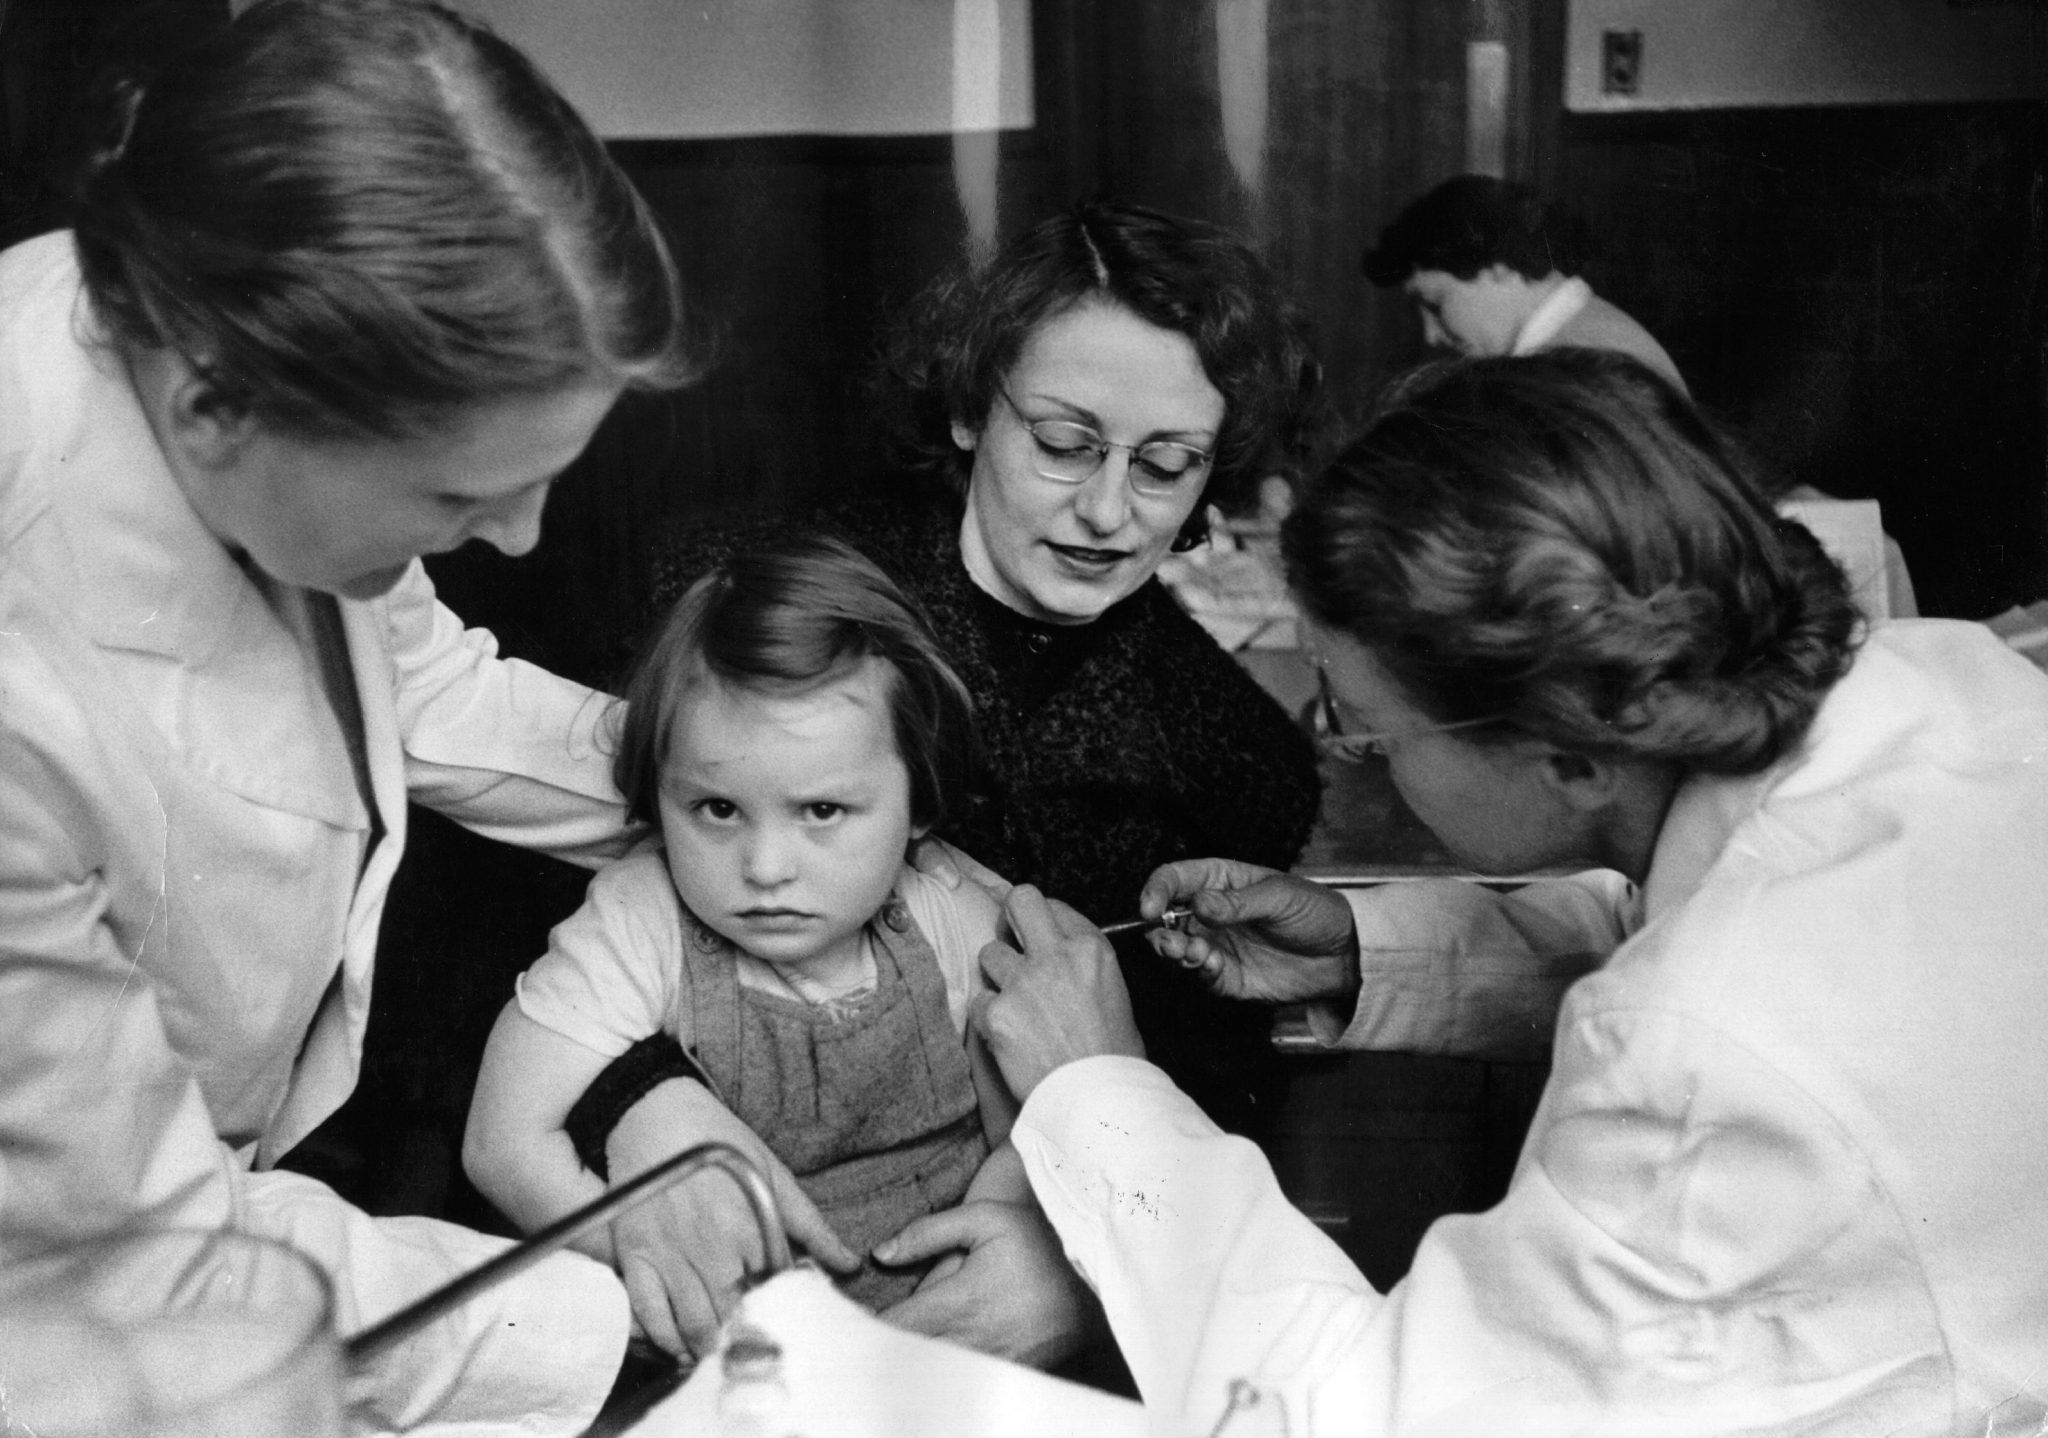 A rather reluctant-looking girl is given an injection of vaccine against poliomyelitis as part of Britain's biggest vaccination programme. Original Publication: Picture Post - 8399 - A Mass Experiment - pub. 1956 (Photo by Thurston Hopkins/Getty Images)